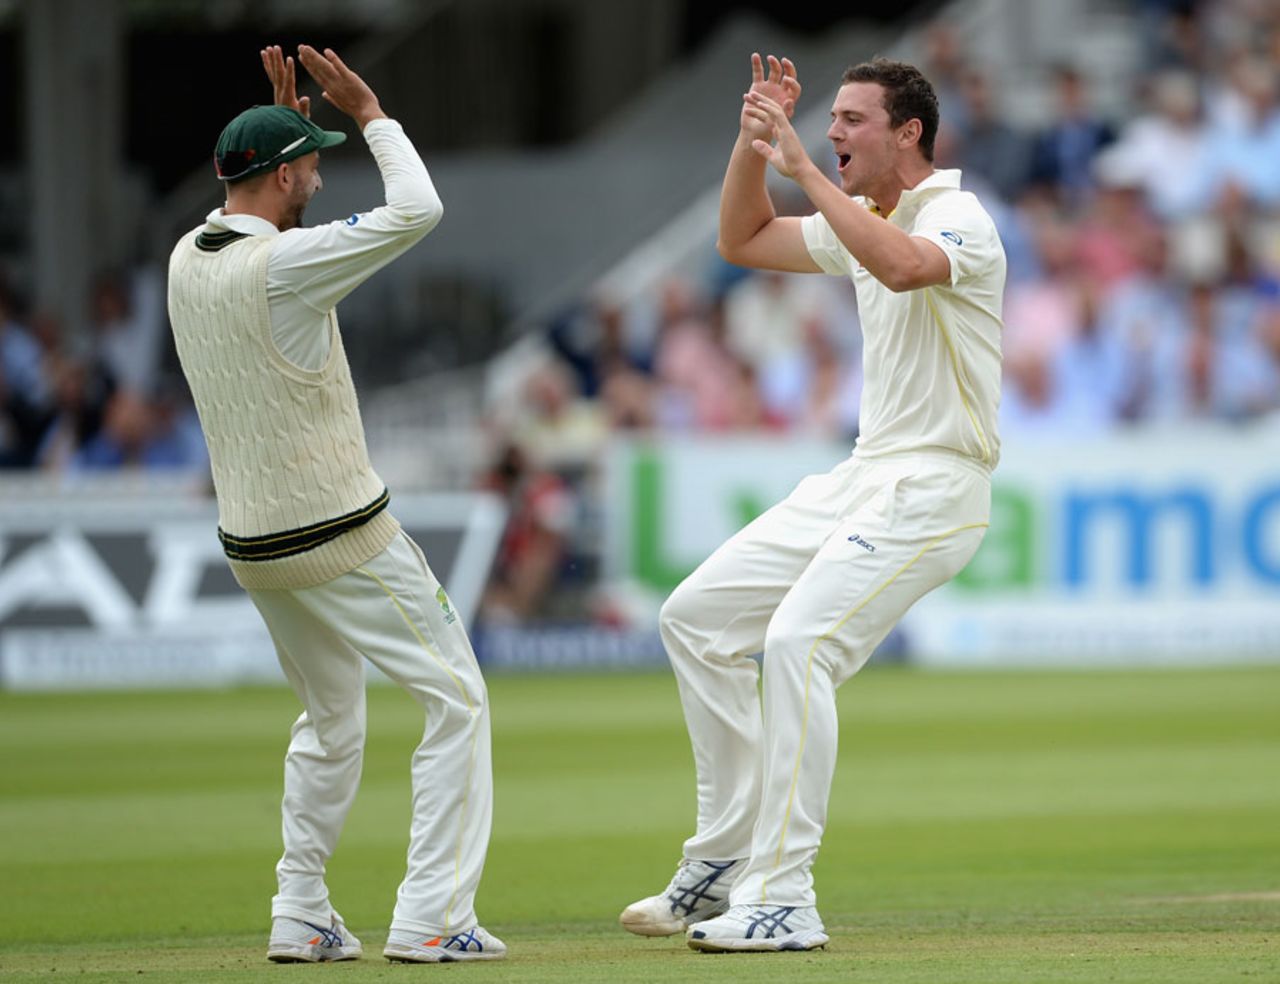 Josh Hazlewood celebrates his maiden Lord's wicket, England v Australia, 2nd Investec Ashes Test, Lord's, 2nd day, July 17, 2015